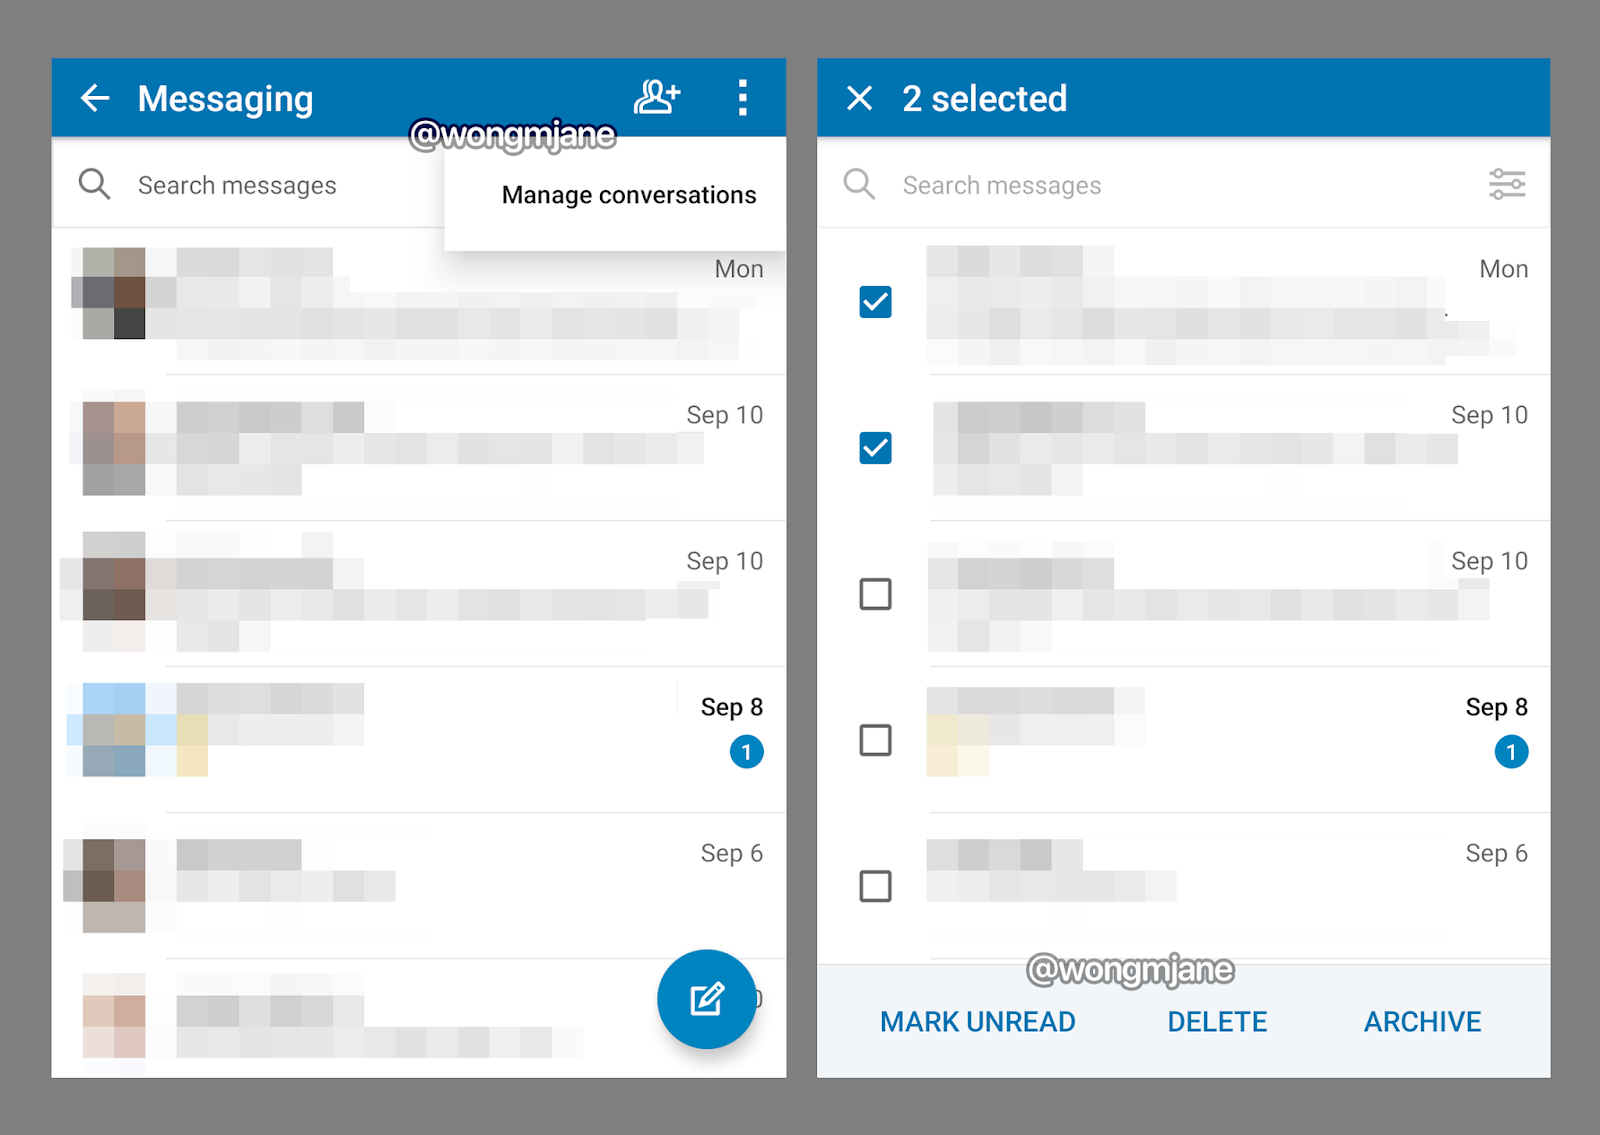 LinkedIn is testing "Manage conversations" that allows managing multiple message threads in batch